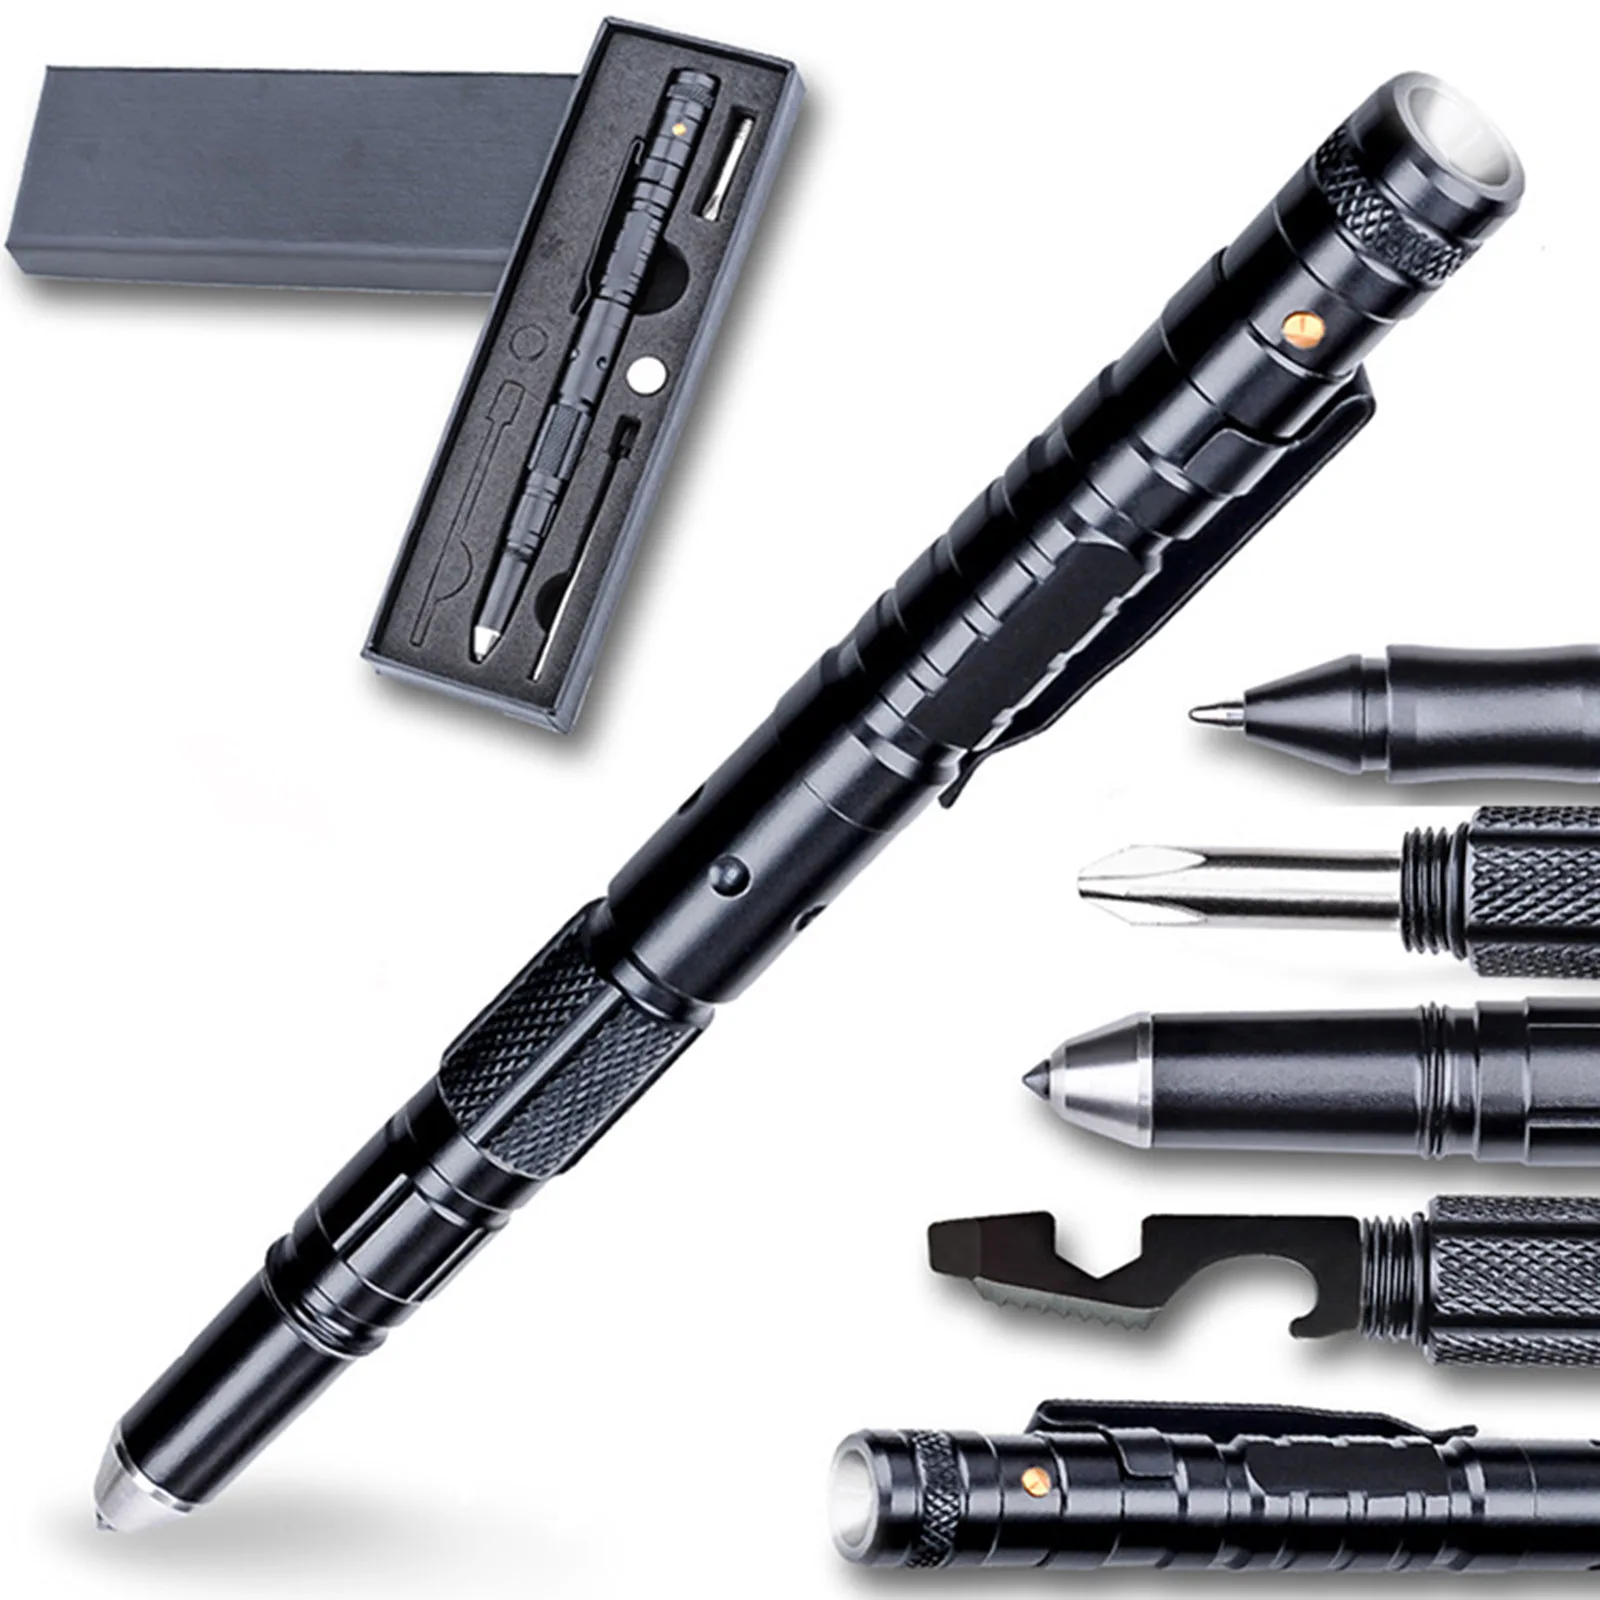 10 in 1 LED Flashlight, Tactical Pen Light with Super Bright Pen Flash Light Torch, Compact Survival Multi-Tools Emergency Gear